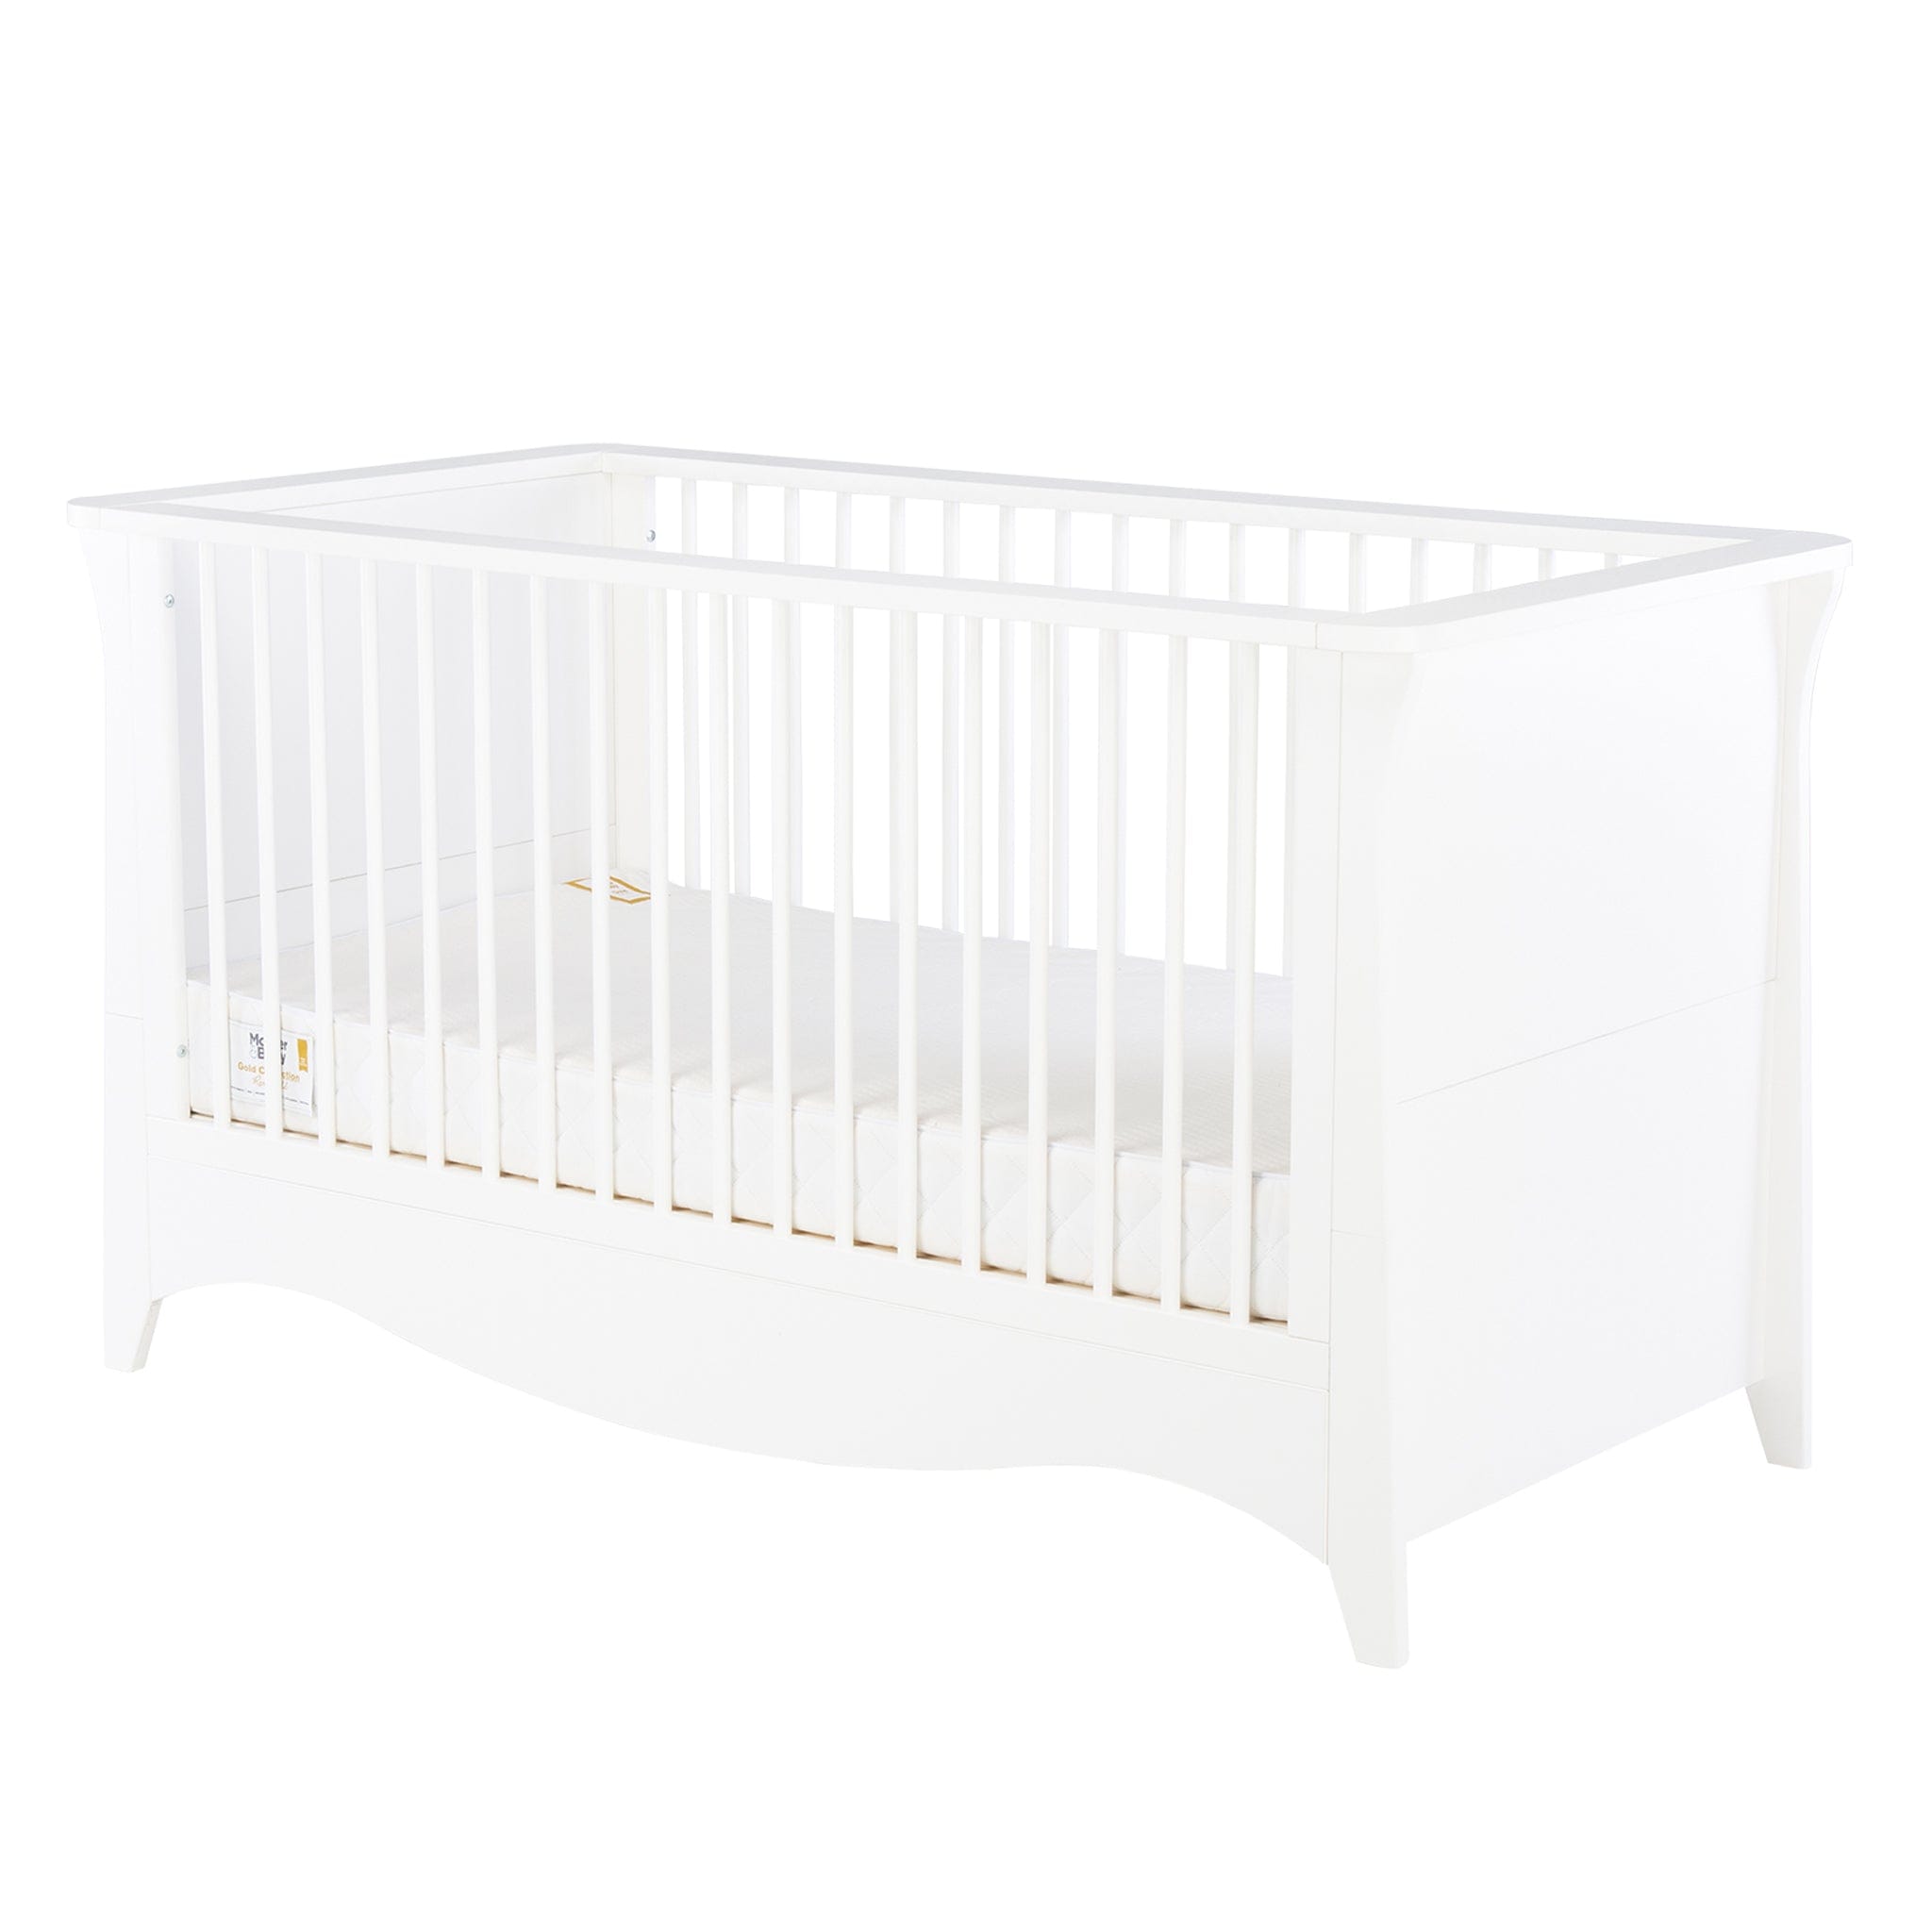 CuddleCo Nursery Room Sets CuddleCo Clara 3 Piece Cot Bed Set in White